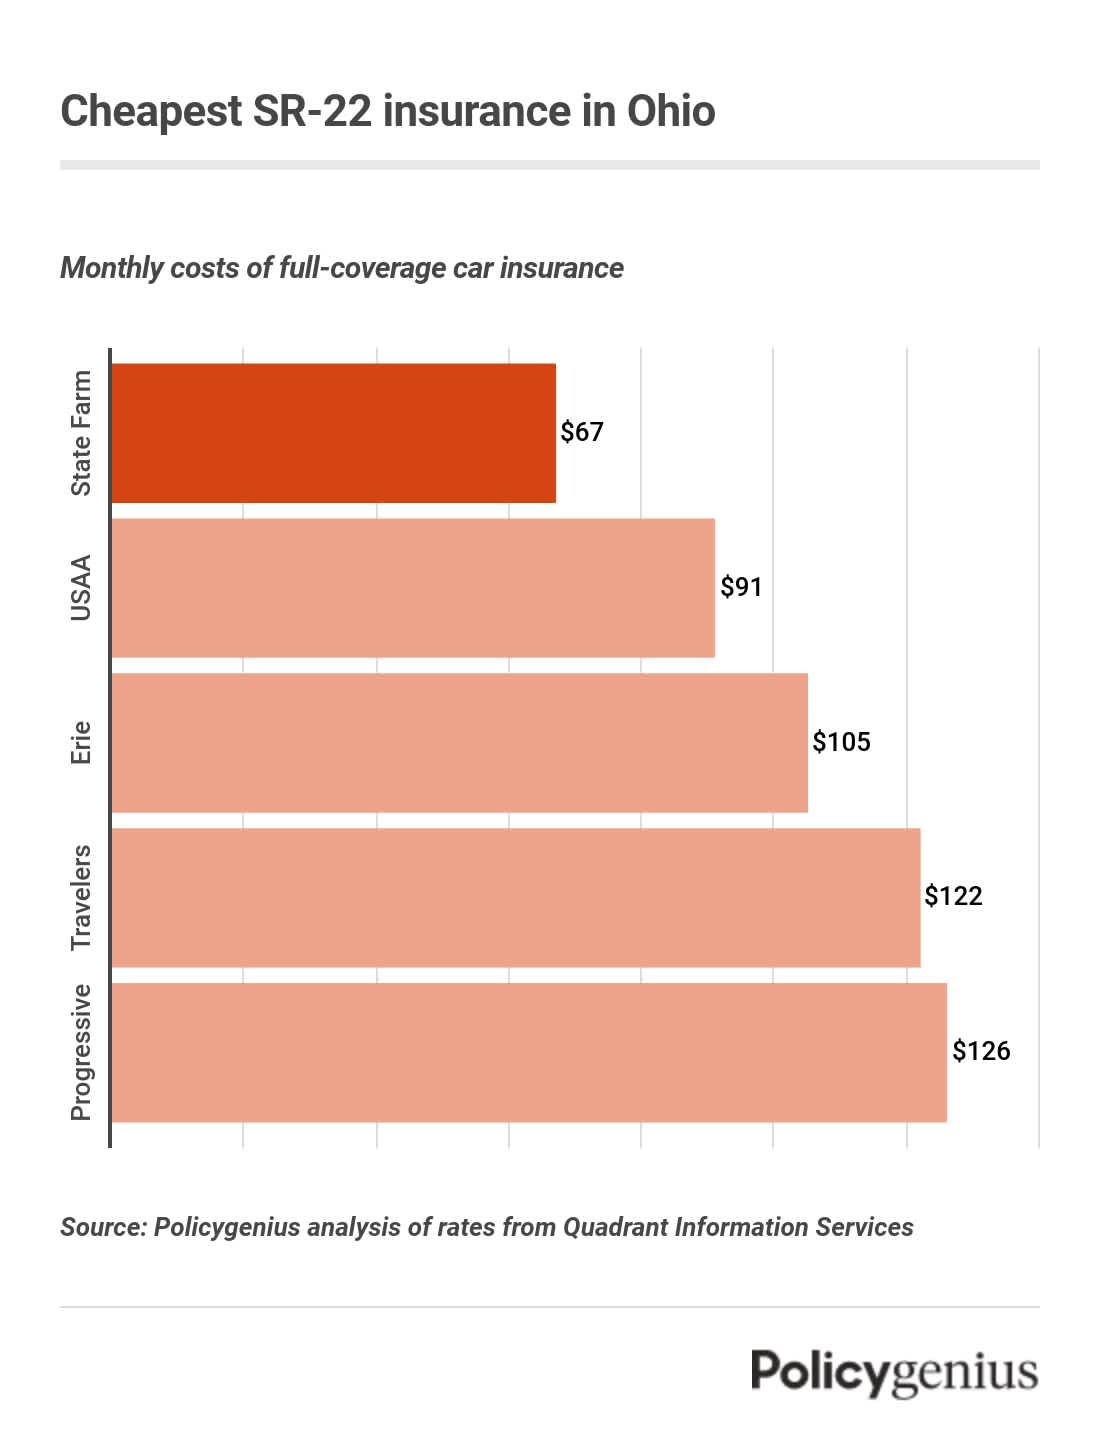 A bar graph showing the five cheapest companies for SR-22 insurance in Ohio